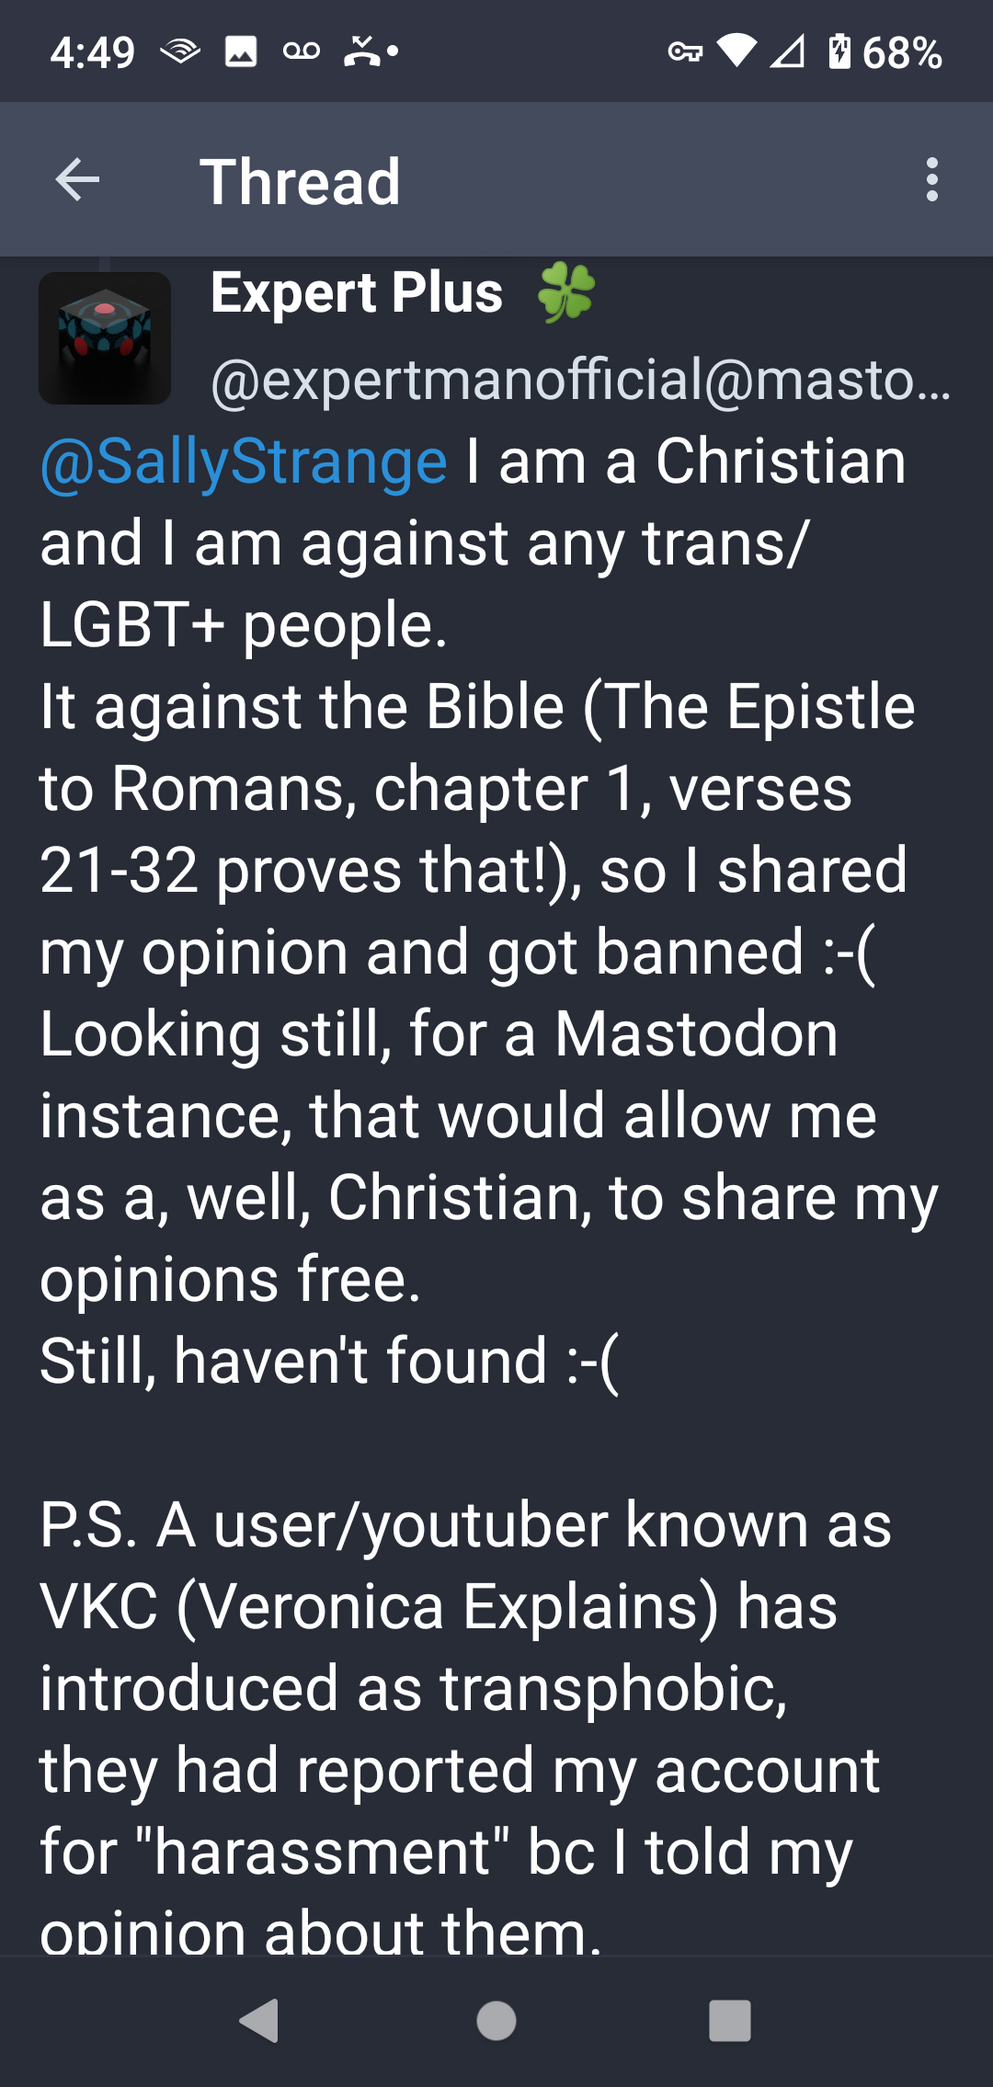 Expert Man Official says to me: "I am a Christian and I am against any trans/LGBT+ people.
It is against the Bible (The Epistle to Romans, chapter 1, verses 21-32 proves that!) so I shared my opinion and got banned. :-(
Looking still, for a Mastodon instance, that would allow me as a, well, Christian, to share my opinions free
Still, haven't found. :-(
P.S. A user/youtuber known as VKC (Veronica Explains) has introduced as transphobic, they had reported my account for "harassment" because I told my opinion about them.